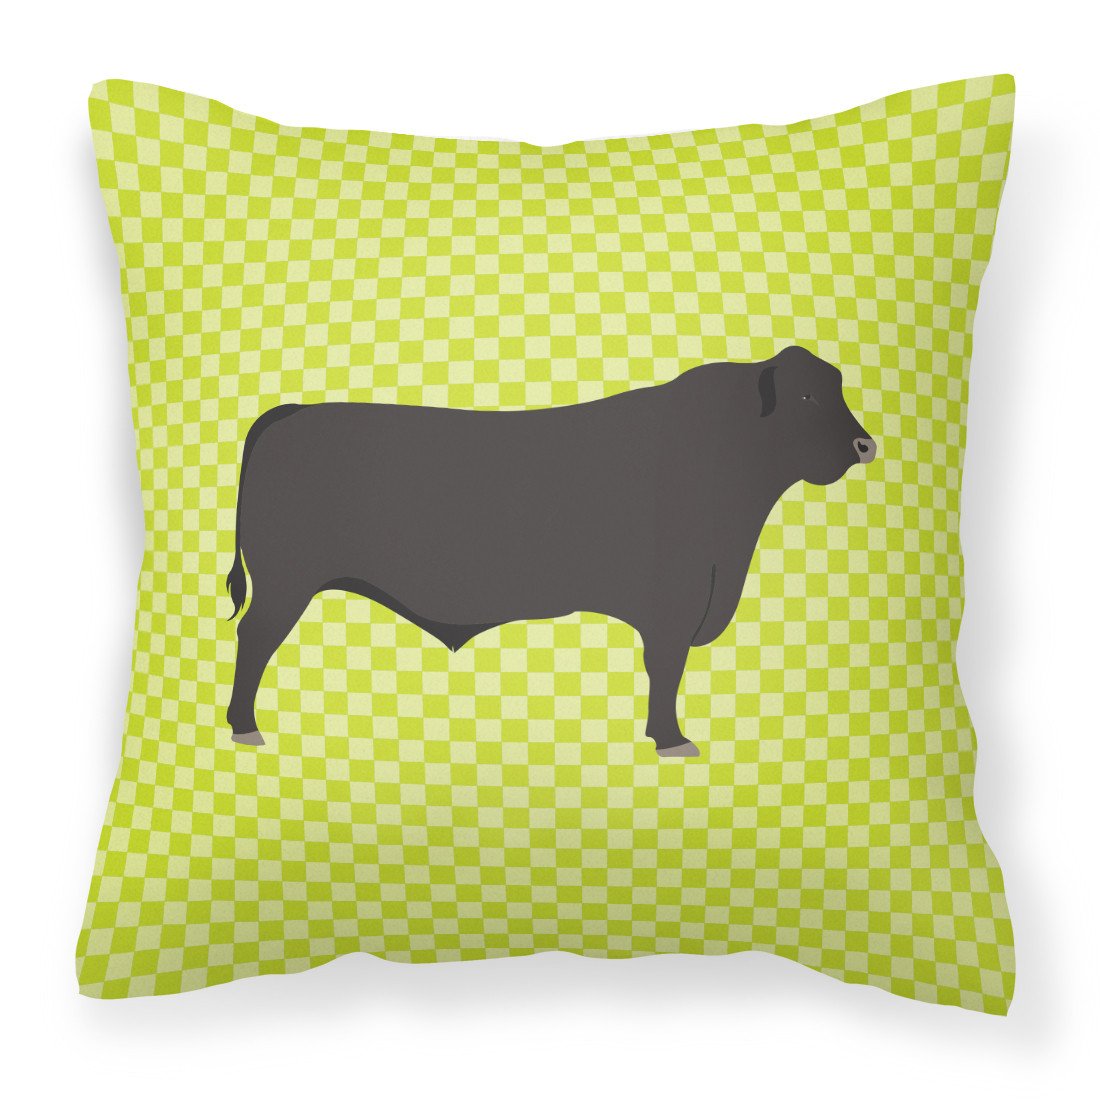 Black Angus Cow Green Fabric Decorative Pillow BB7654PW1818 by Caroline's Treasures